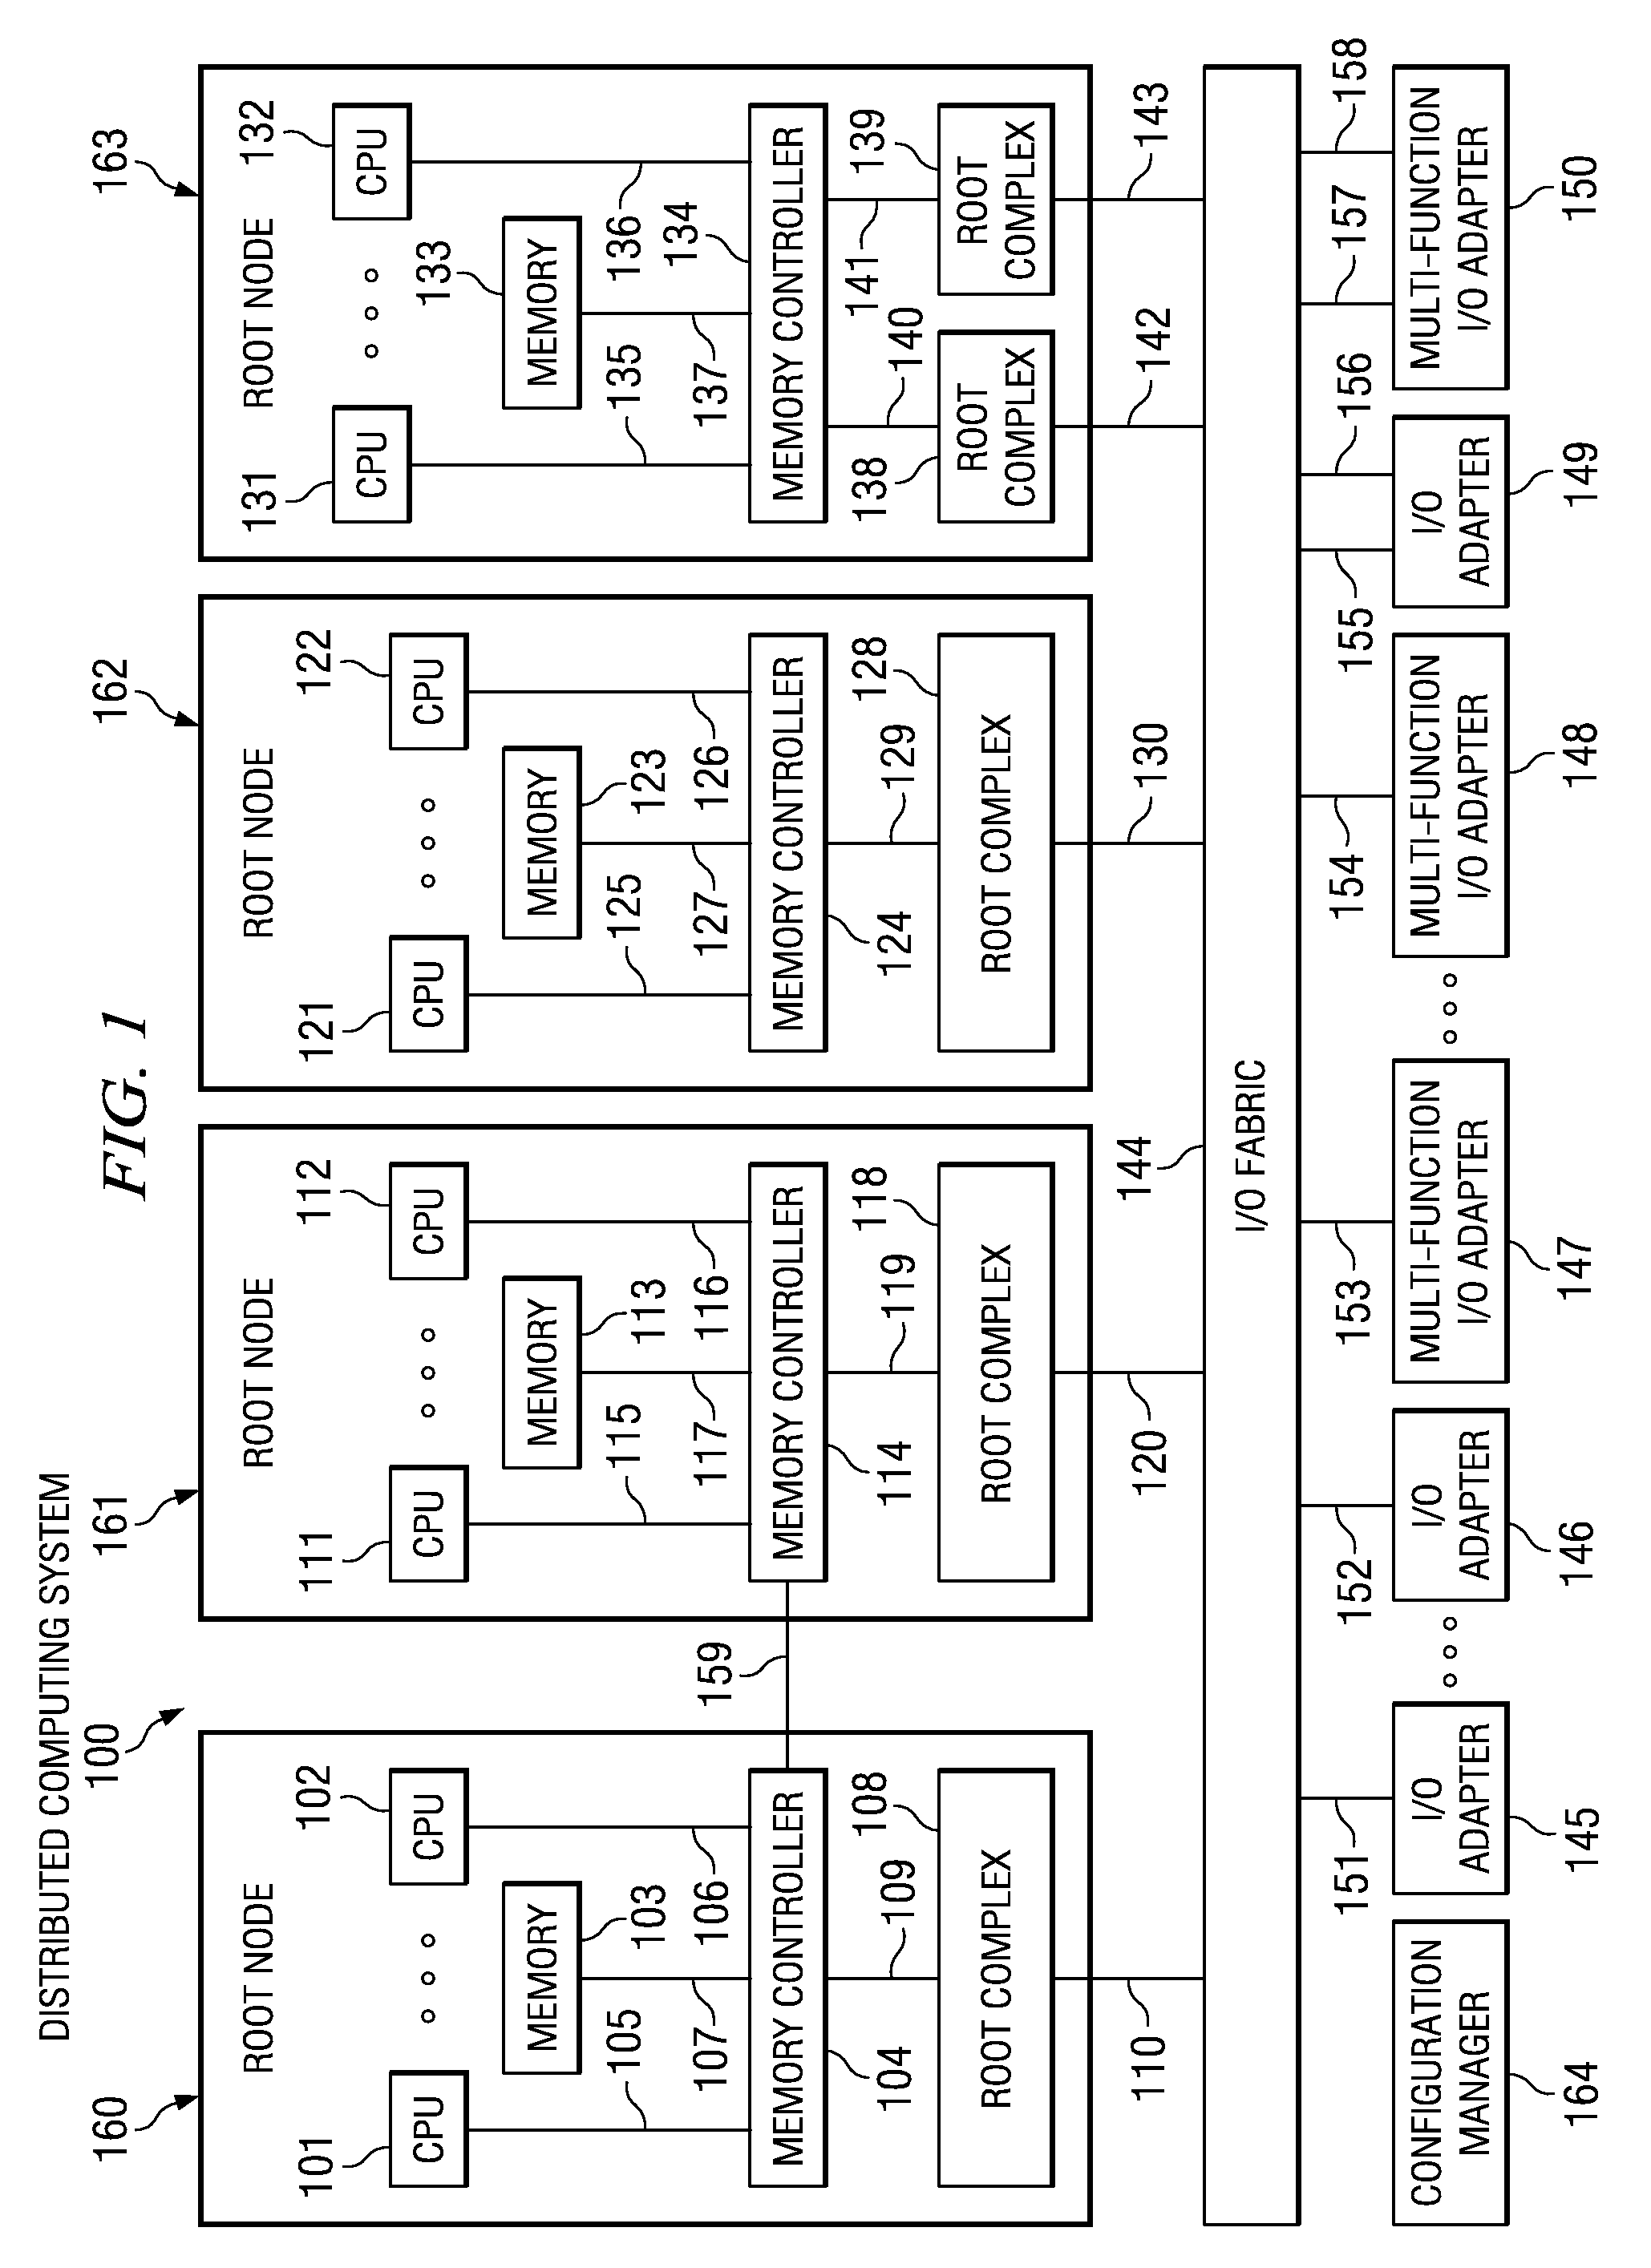 Bus/device/function translation within and routing of communications packets in a PCI switched-fabric in a multi-host environment utilizing multiple root switches